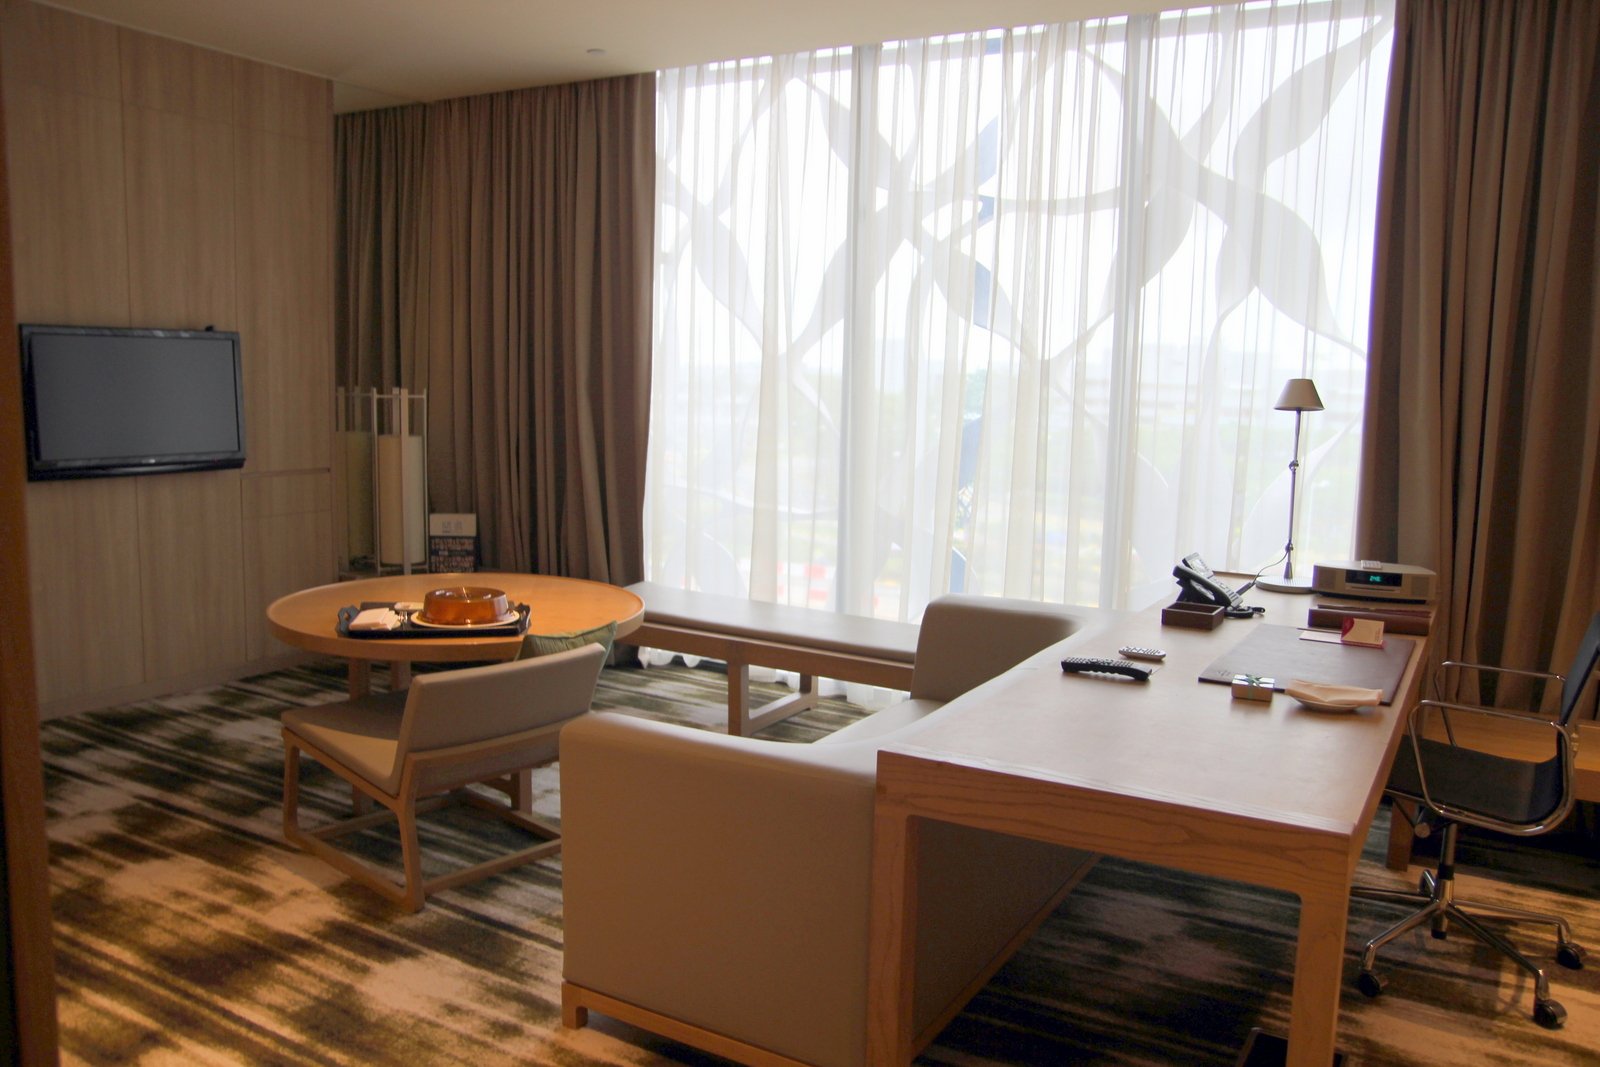 Suite at the Crowne Plaza Changi Airport